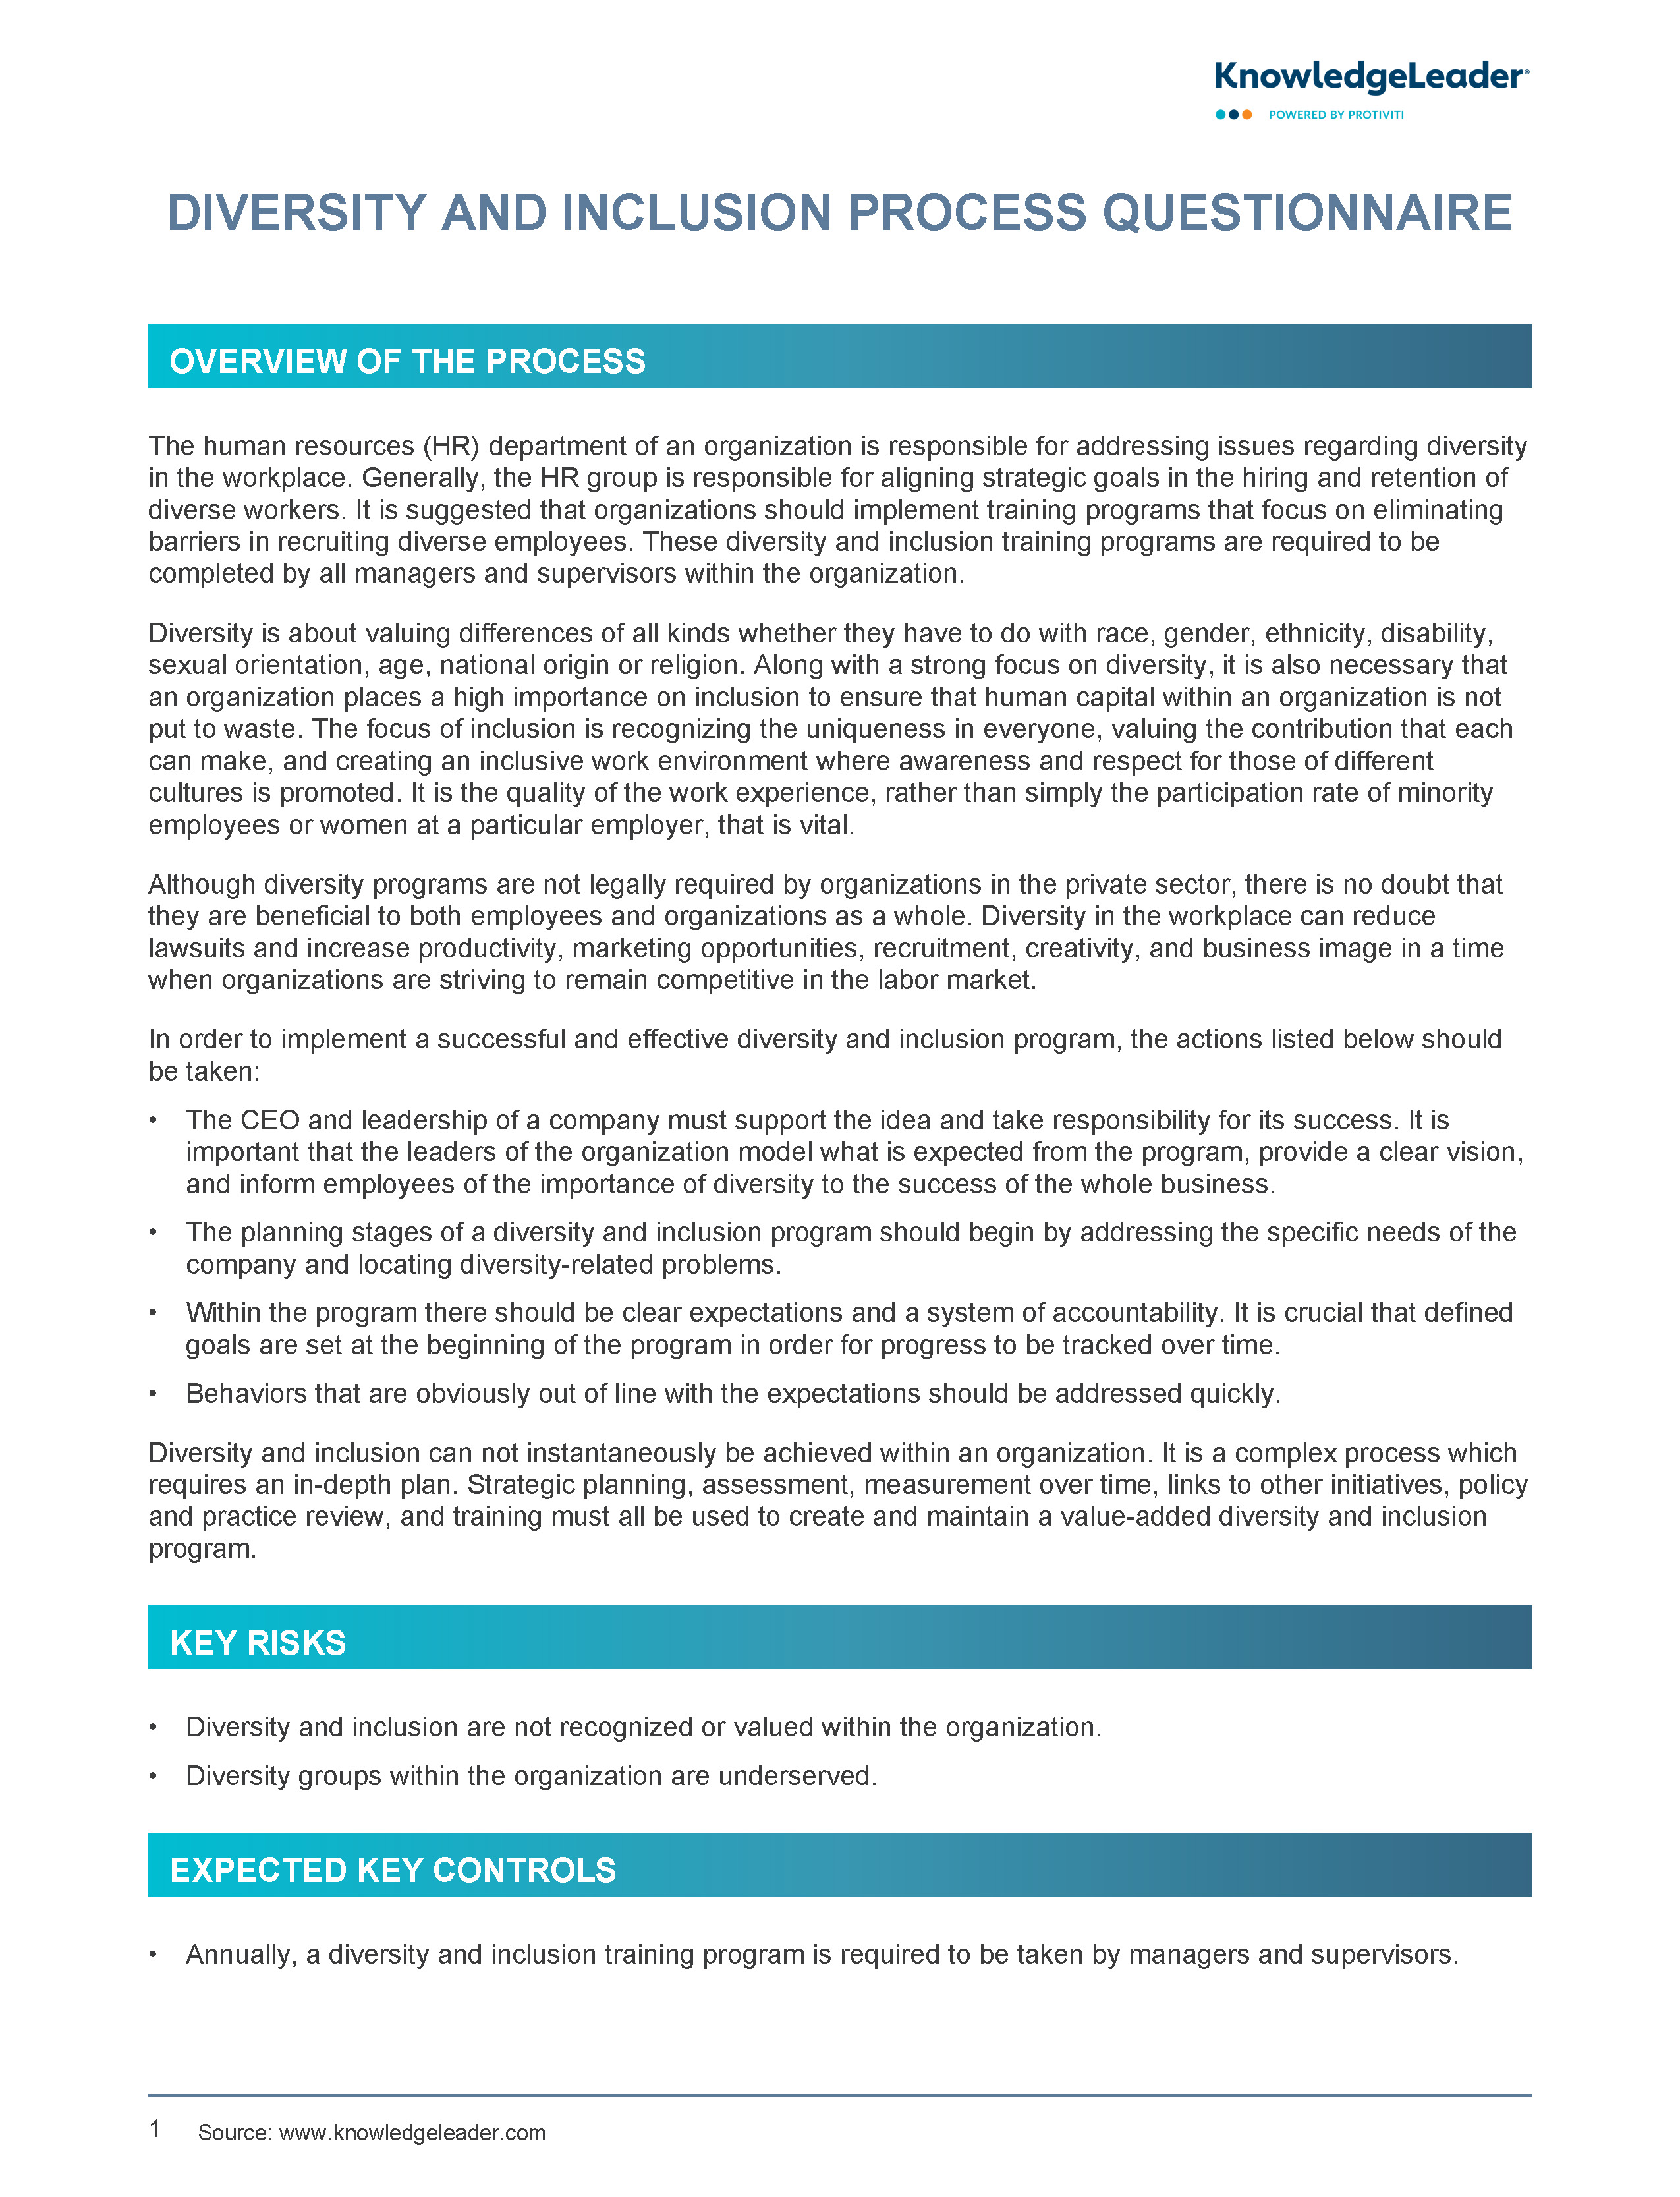 Screenshot of the first page of Diversity and Inclusion Process Questionnaire